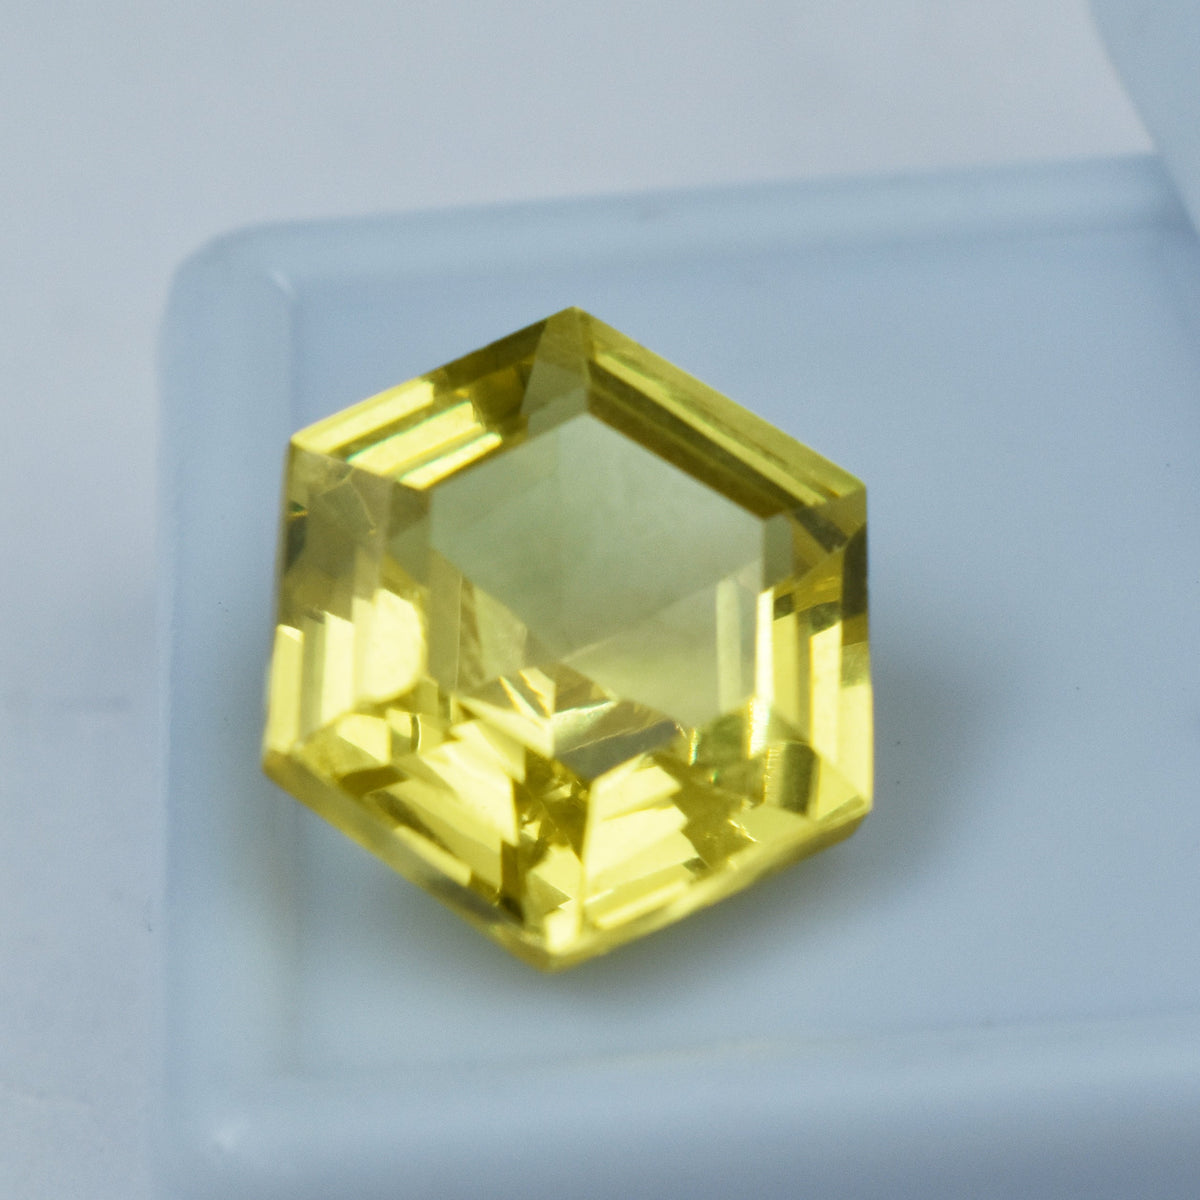 Natural Yellow Sapphire Octagon Shape 9.56 Carat CERTIFIED Extremely Rare Loose Gemstone For Pendent Making Loose Gemstone On Sale